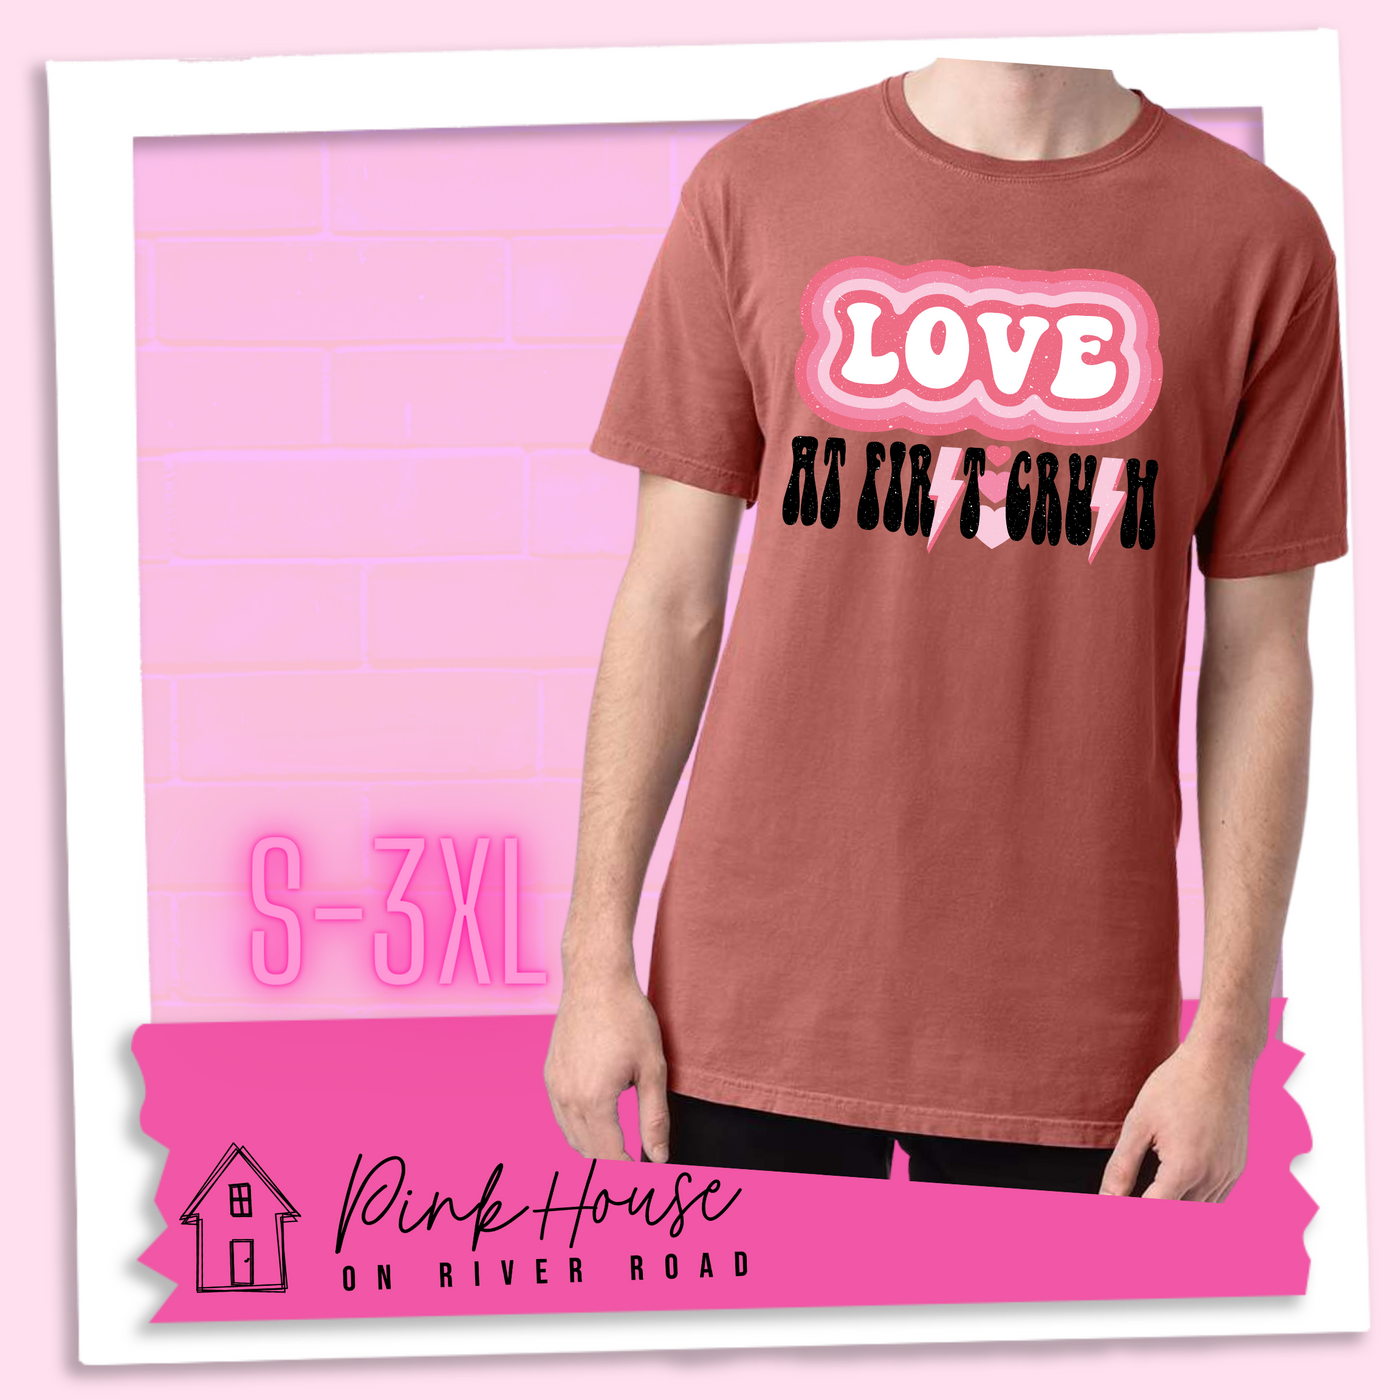 Nantucket Red Tee. The graphic has the word Love in retro bubble letters with differetn colored pink outlines radiating from the word, underneath are the worxs at first in black with the s in first replaced with a pink lightning bolt, then there are three different colored hearts followed by the word crush in the same black font with the S replaced with the same pink lightening bolt.